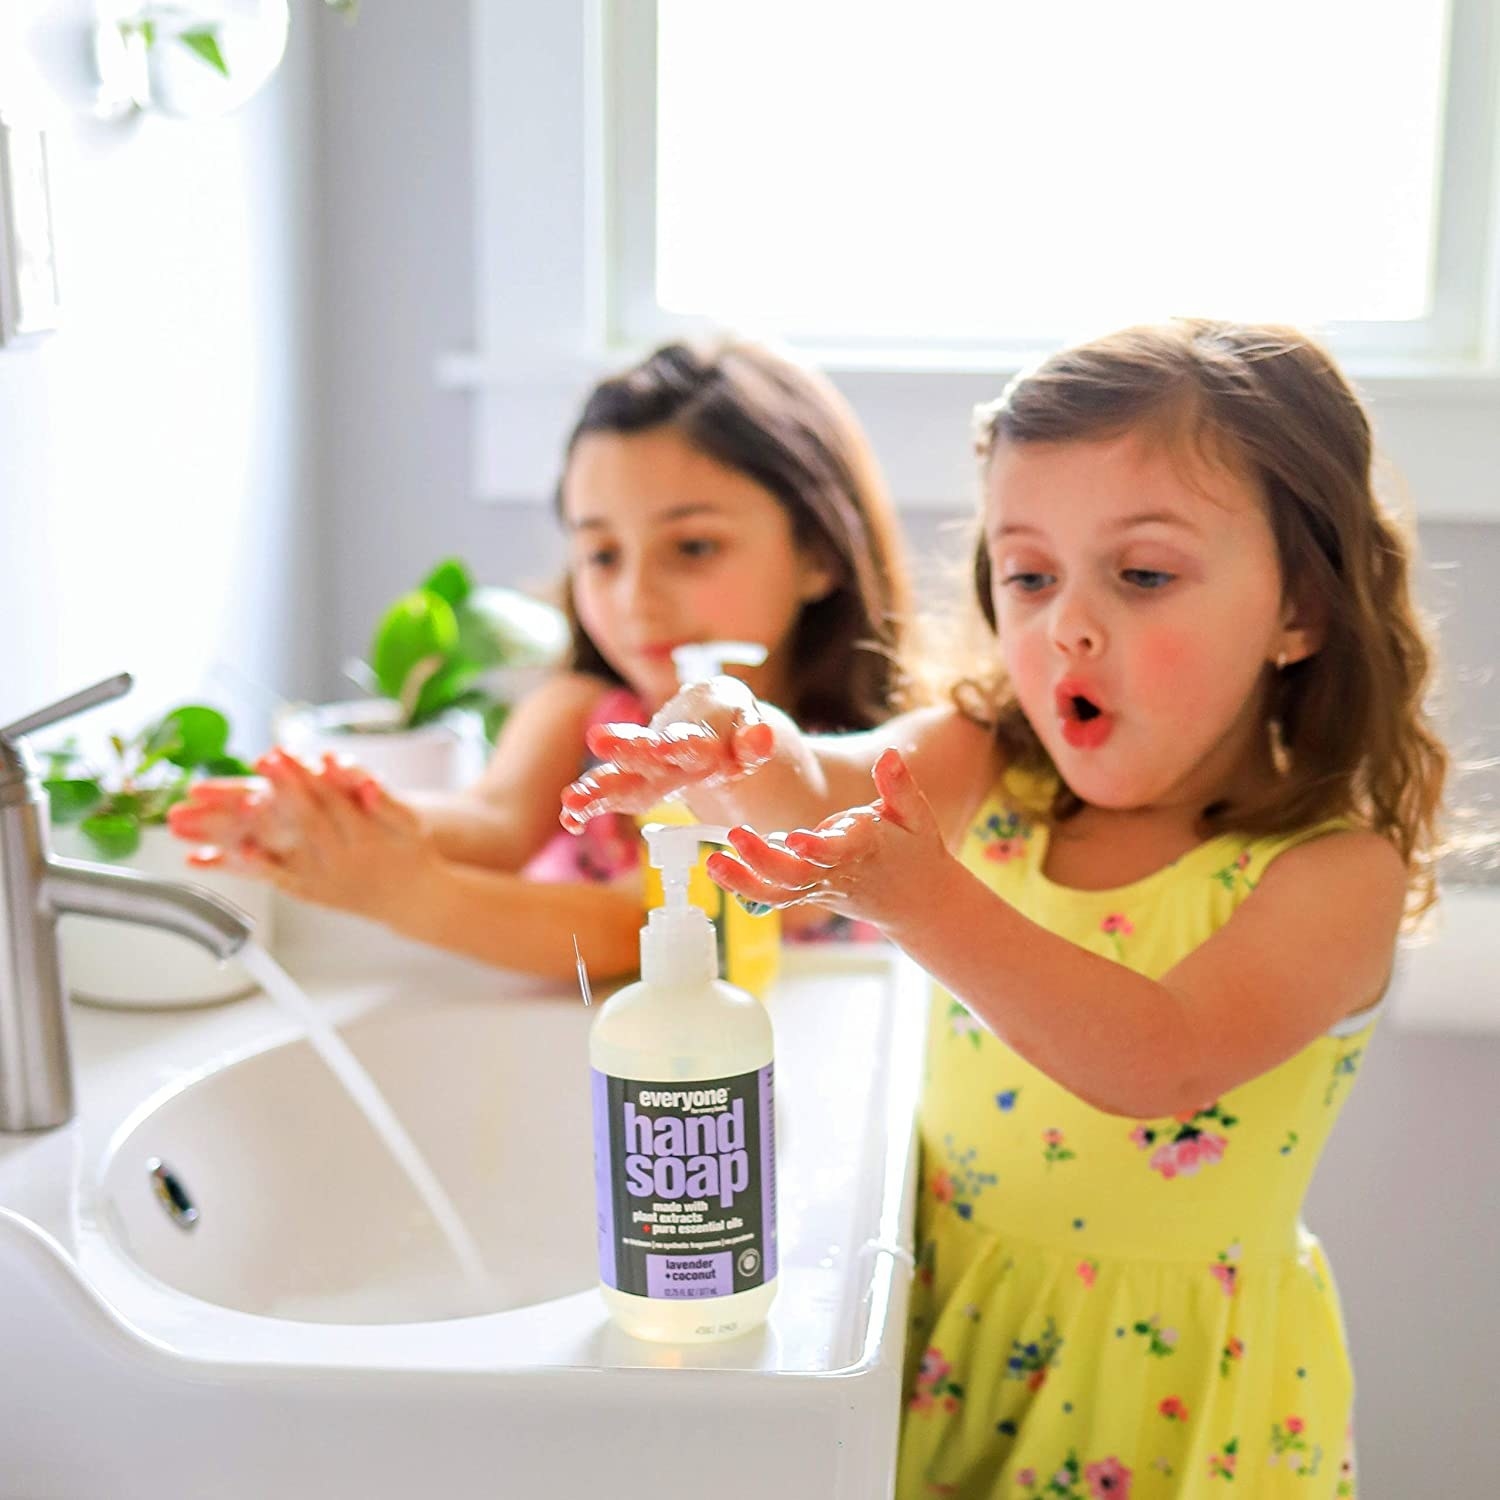 Kids using the nozzle on the soap to dispense it 